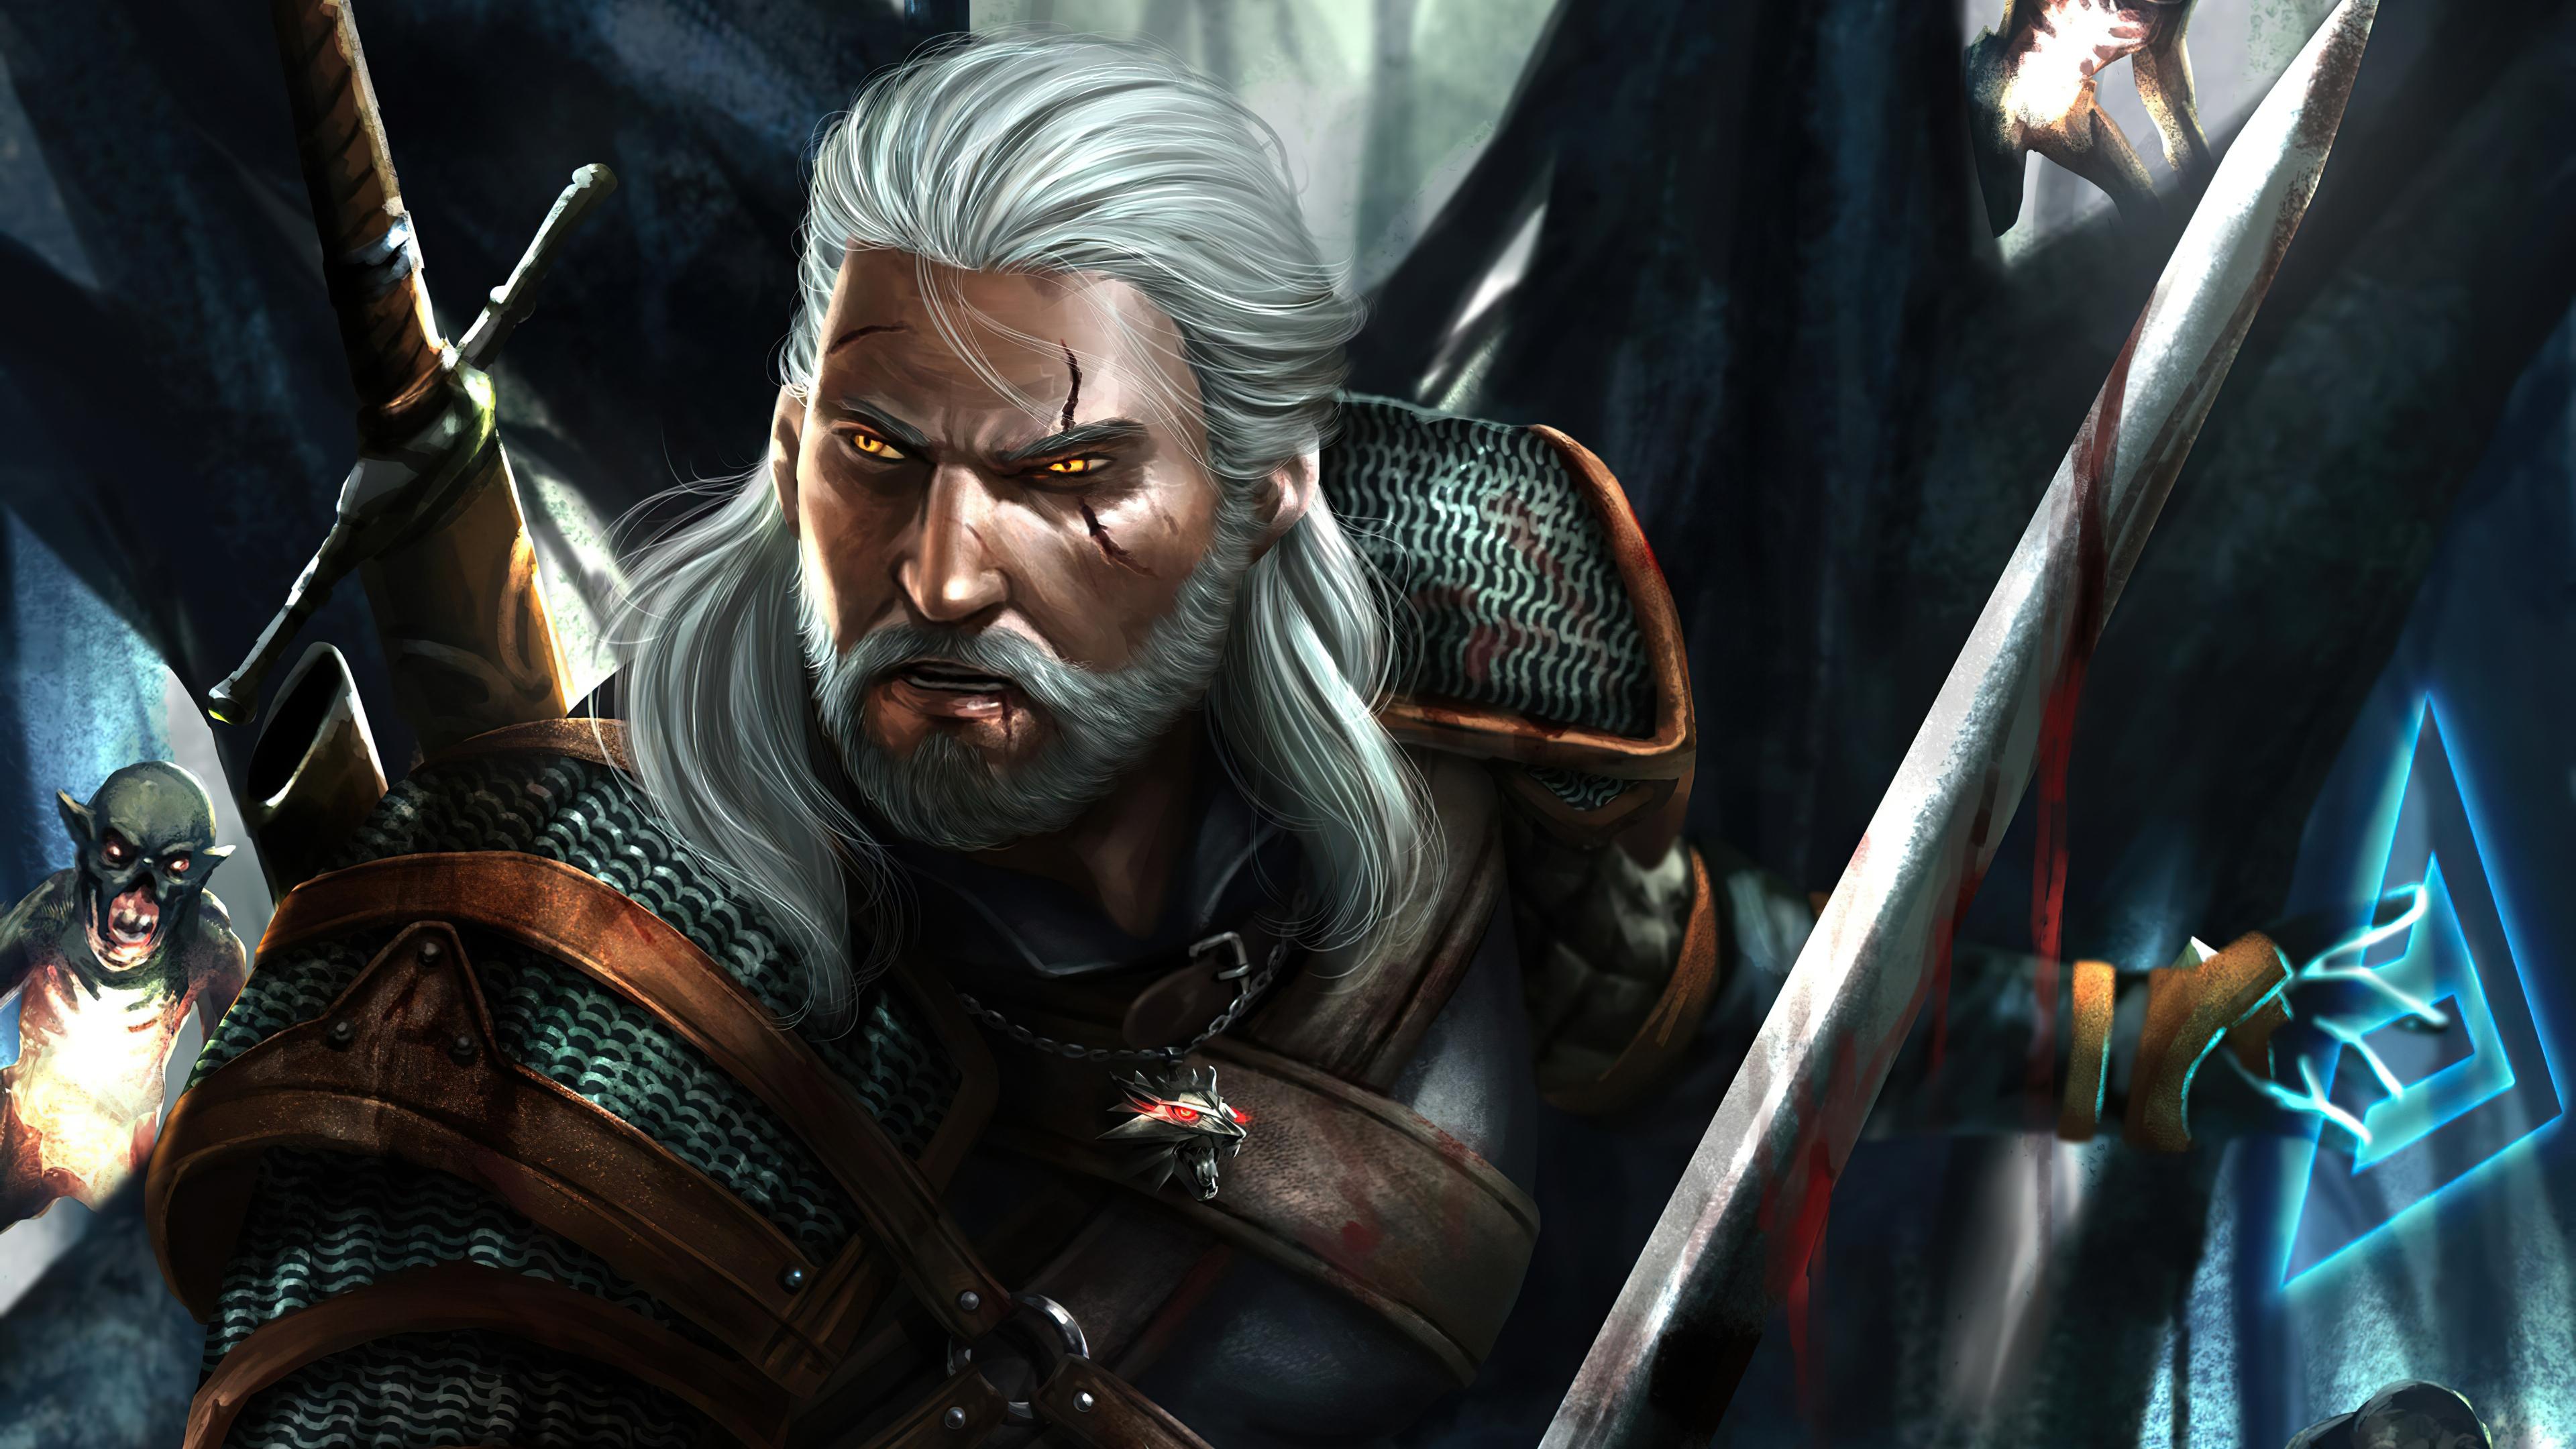 3840 x 2160 · jpeg - 4k Witcher Artwork 2020, HD Tv Shows, 4k Wallpapers, Images ...